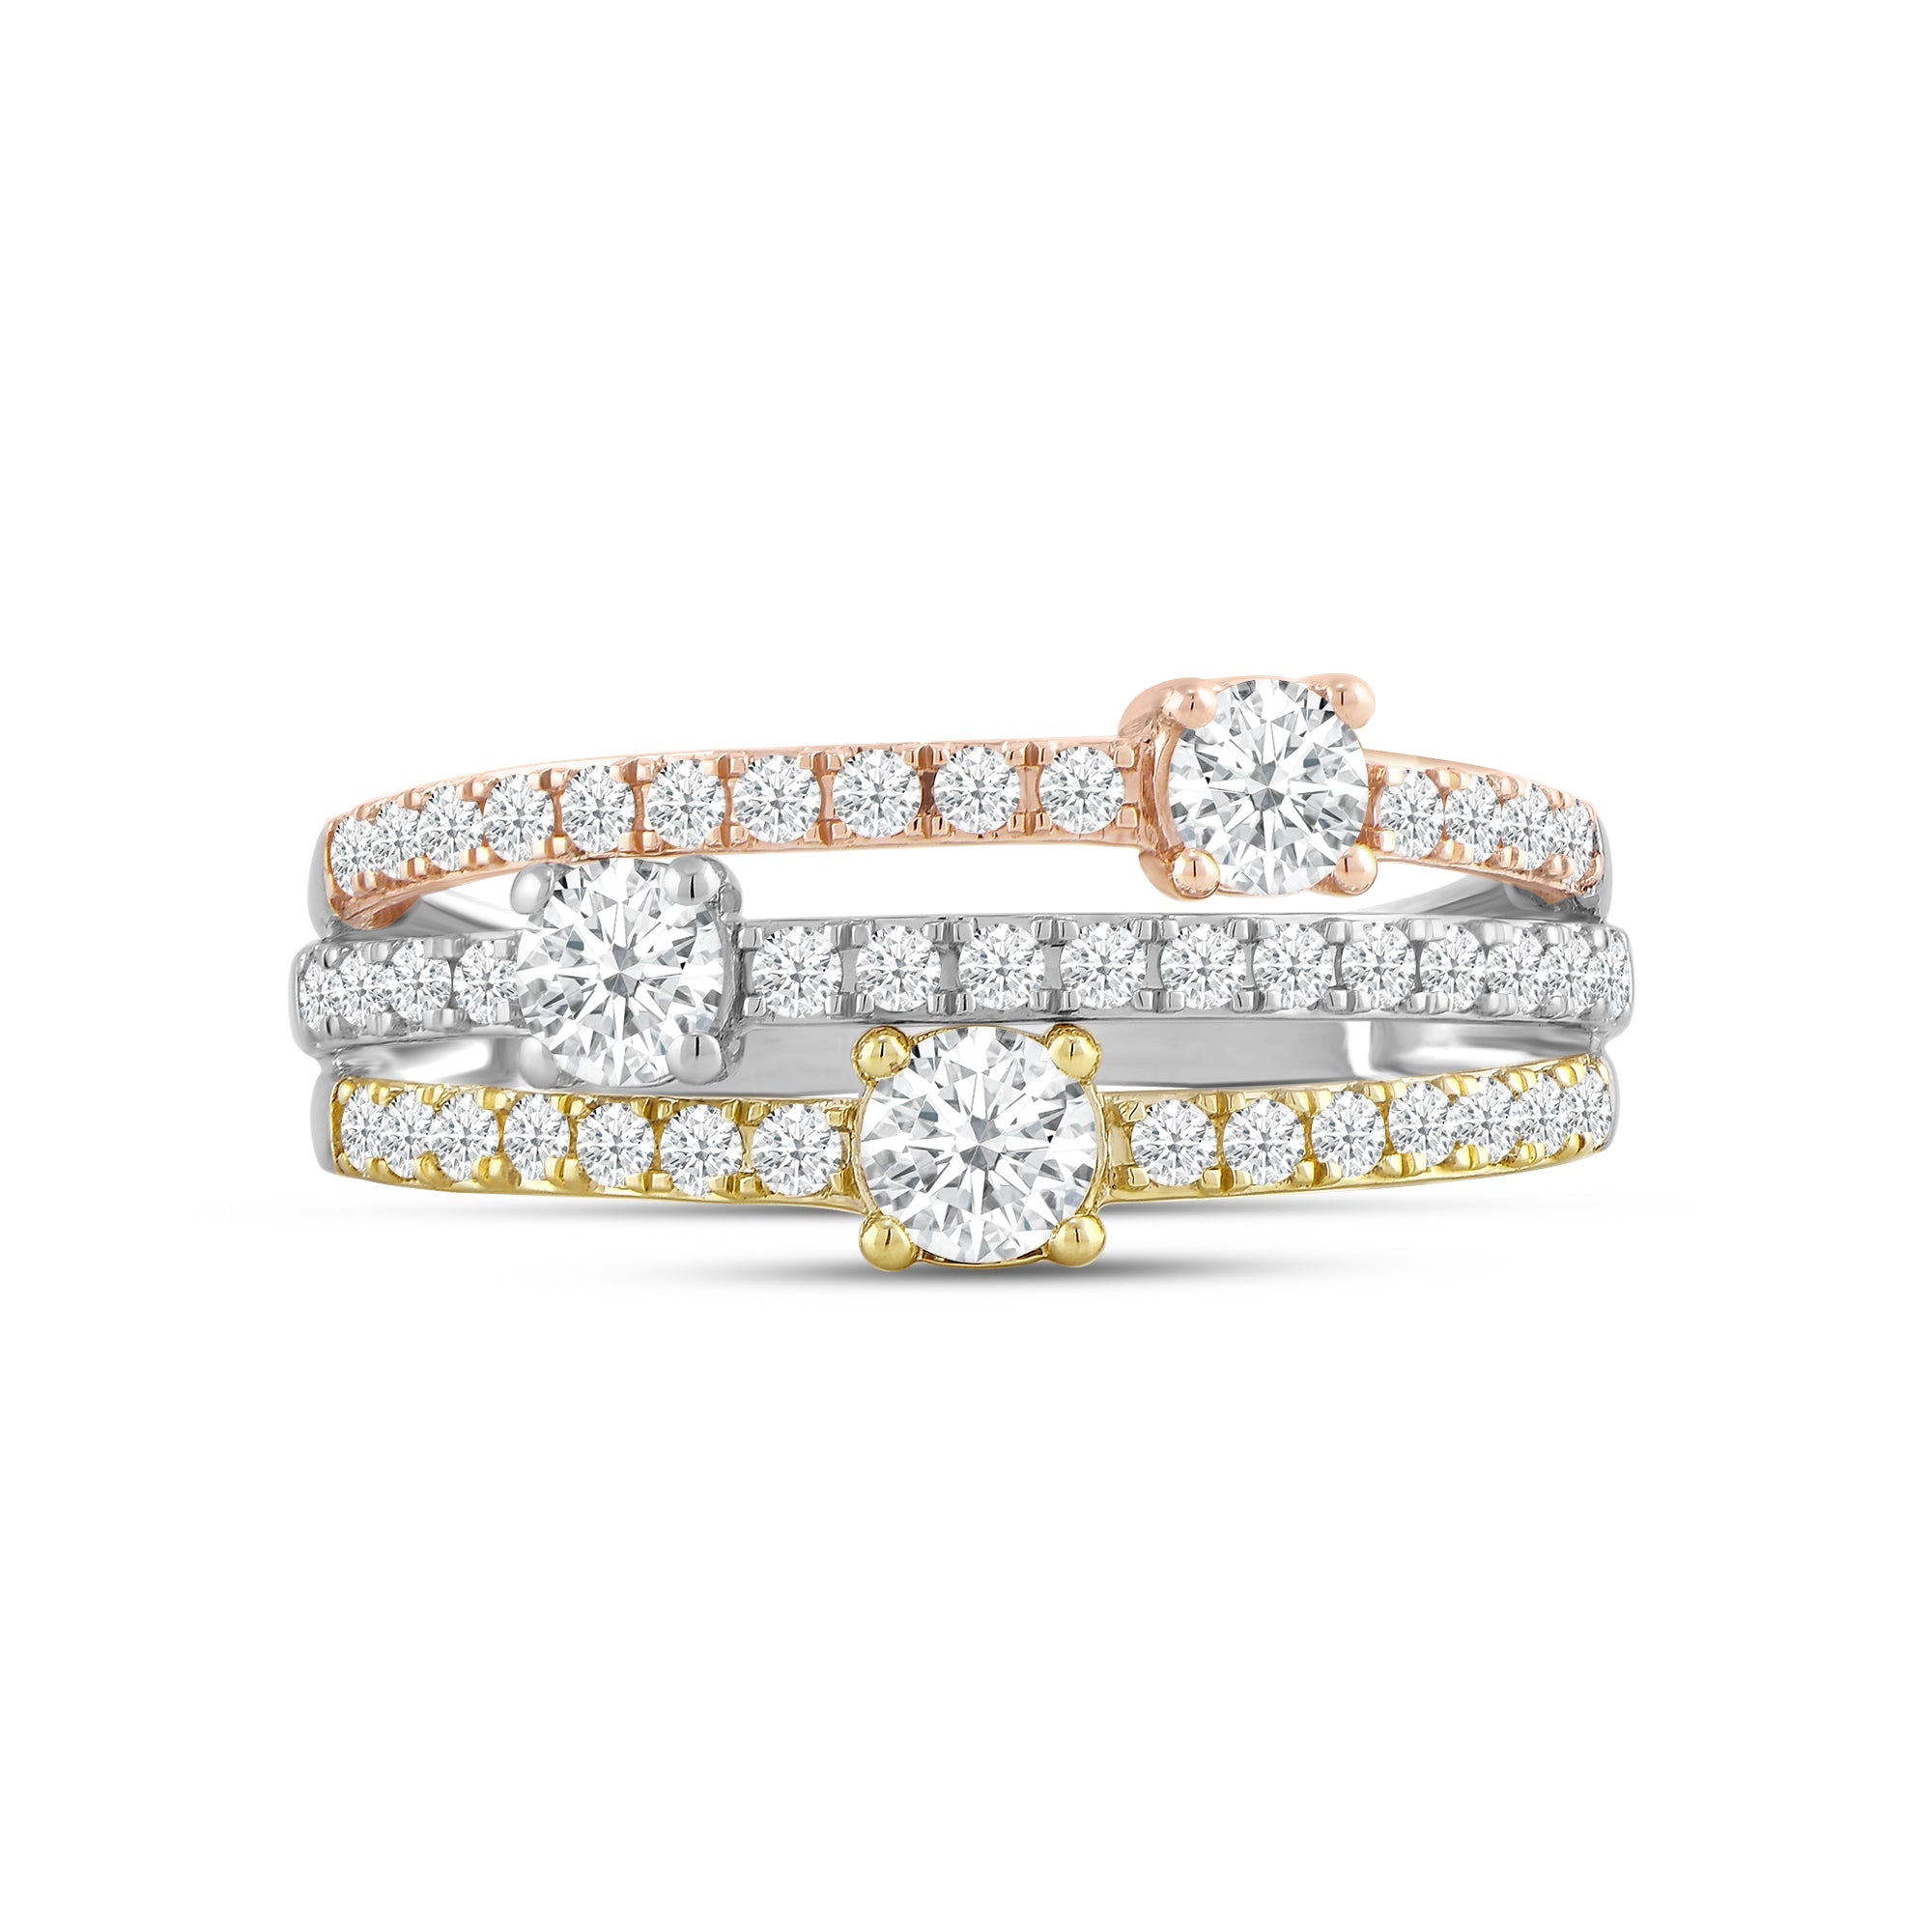 Three Row Beads and Diamonds Scatter Fashion Ring